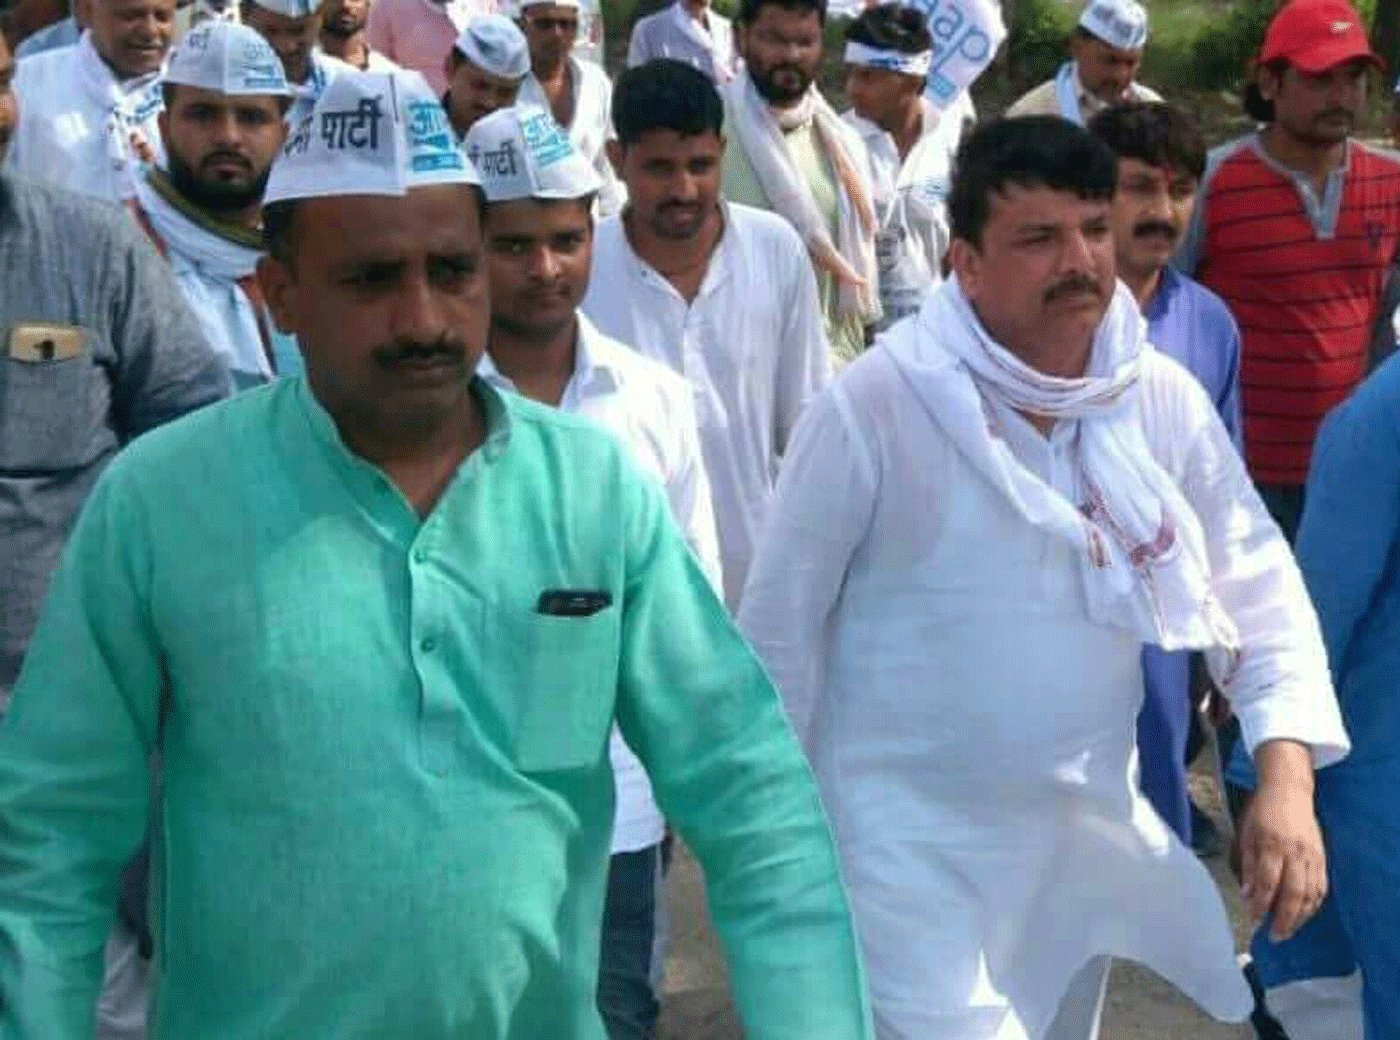 Aap Jan Adhikar Pad yatra did not get permission from government